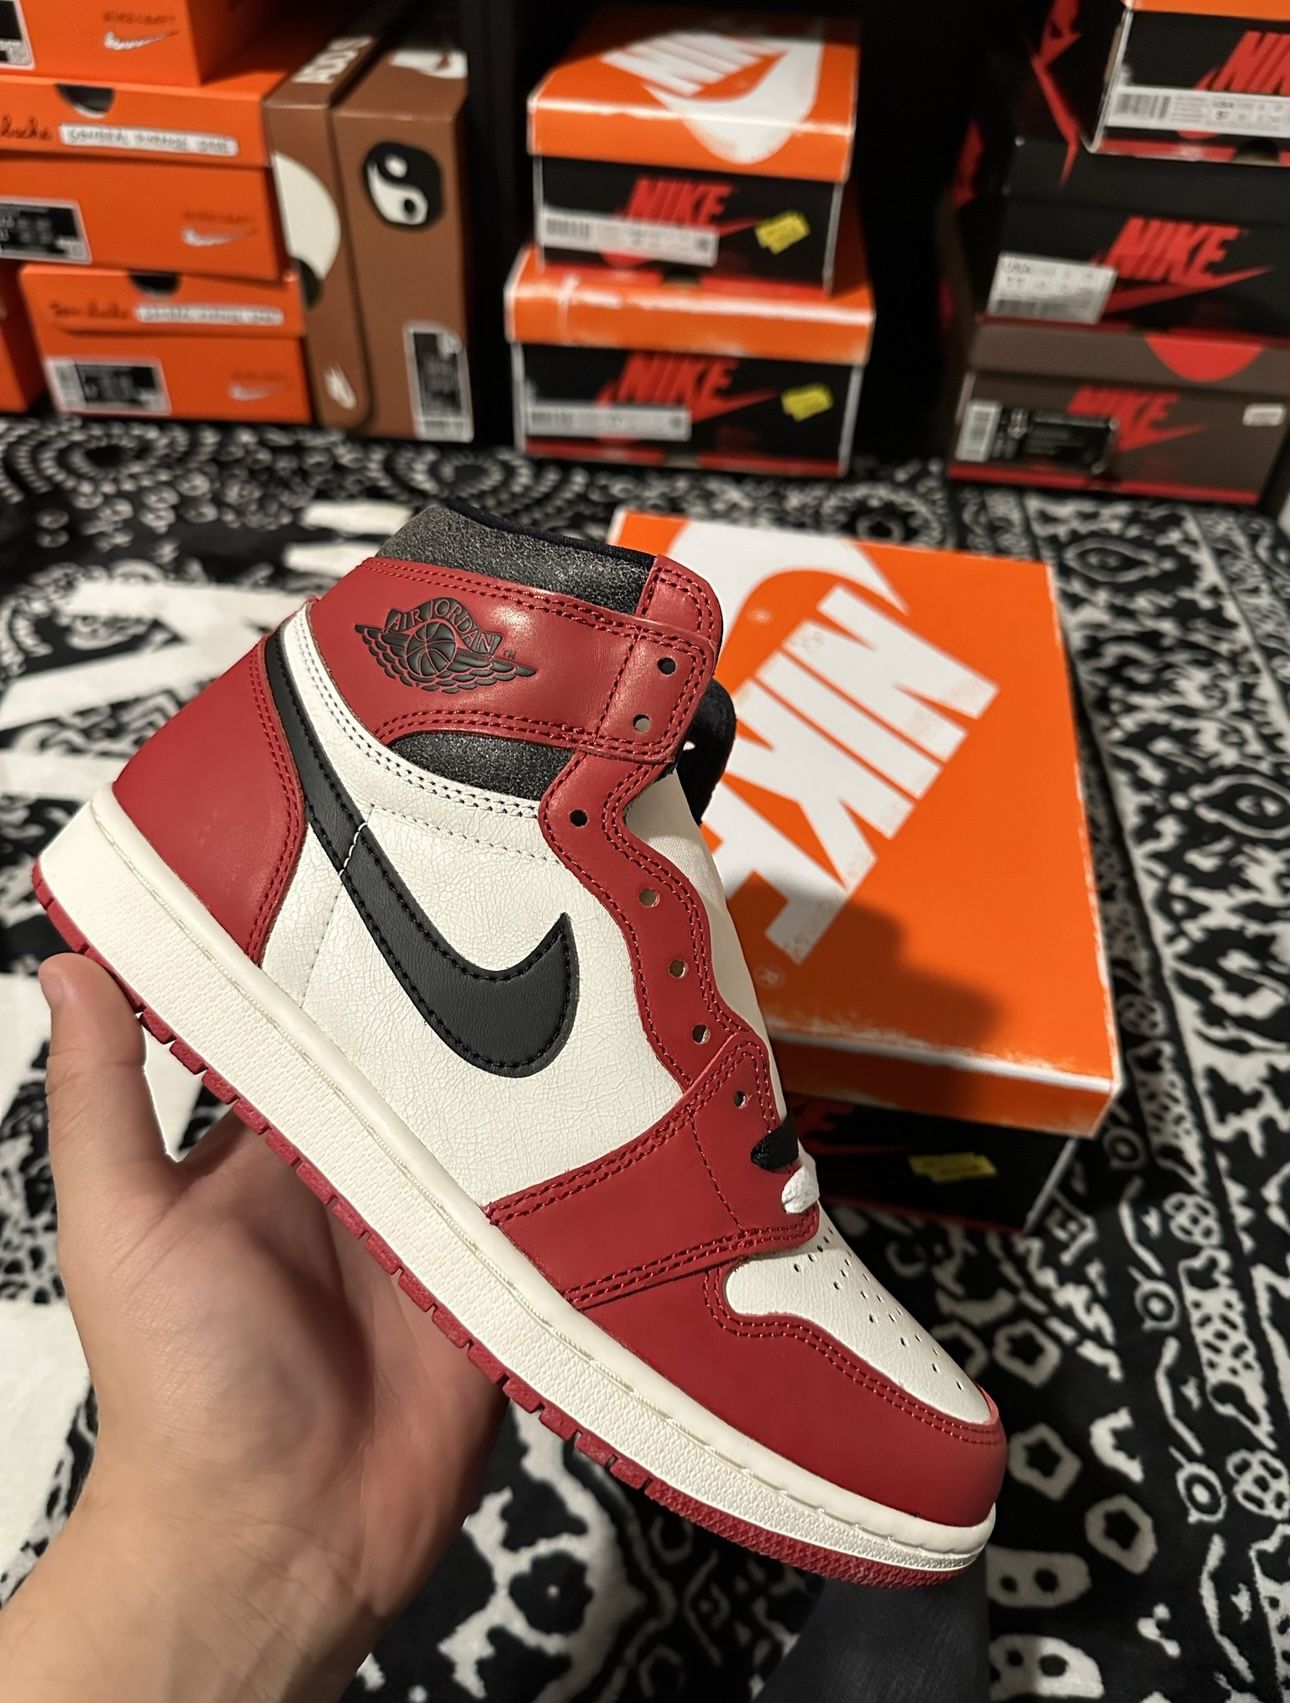 Jordan 1 Lost and Found 